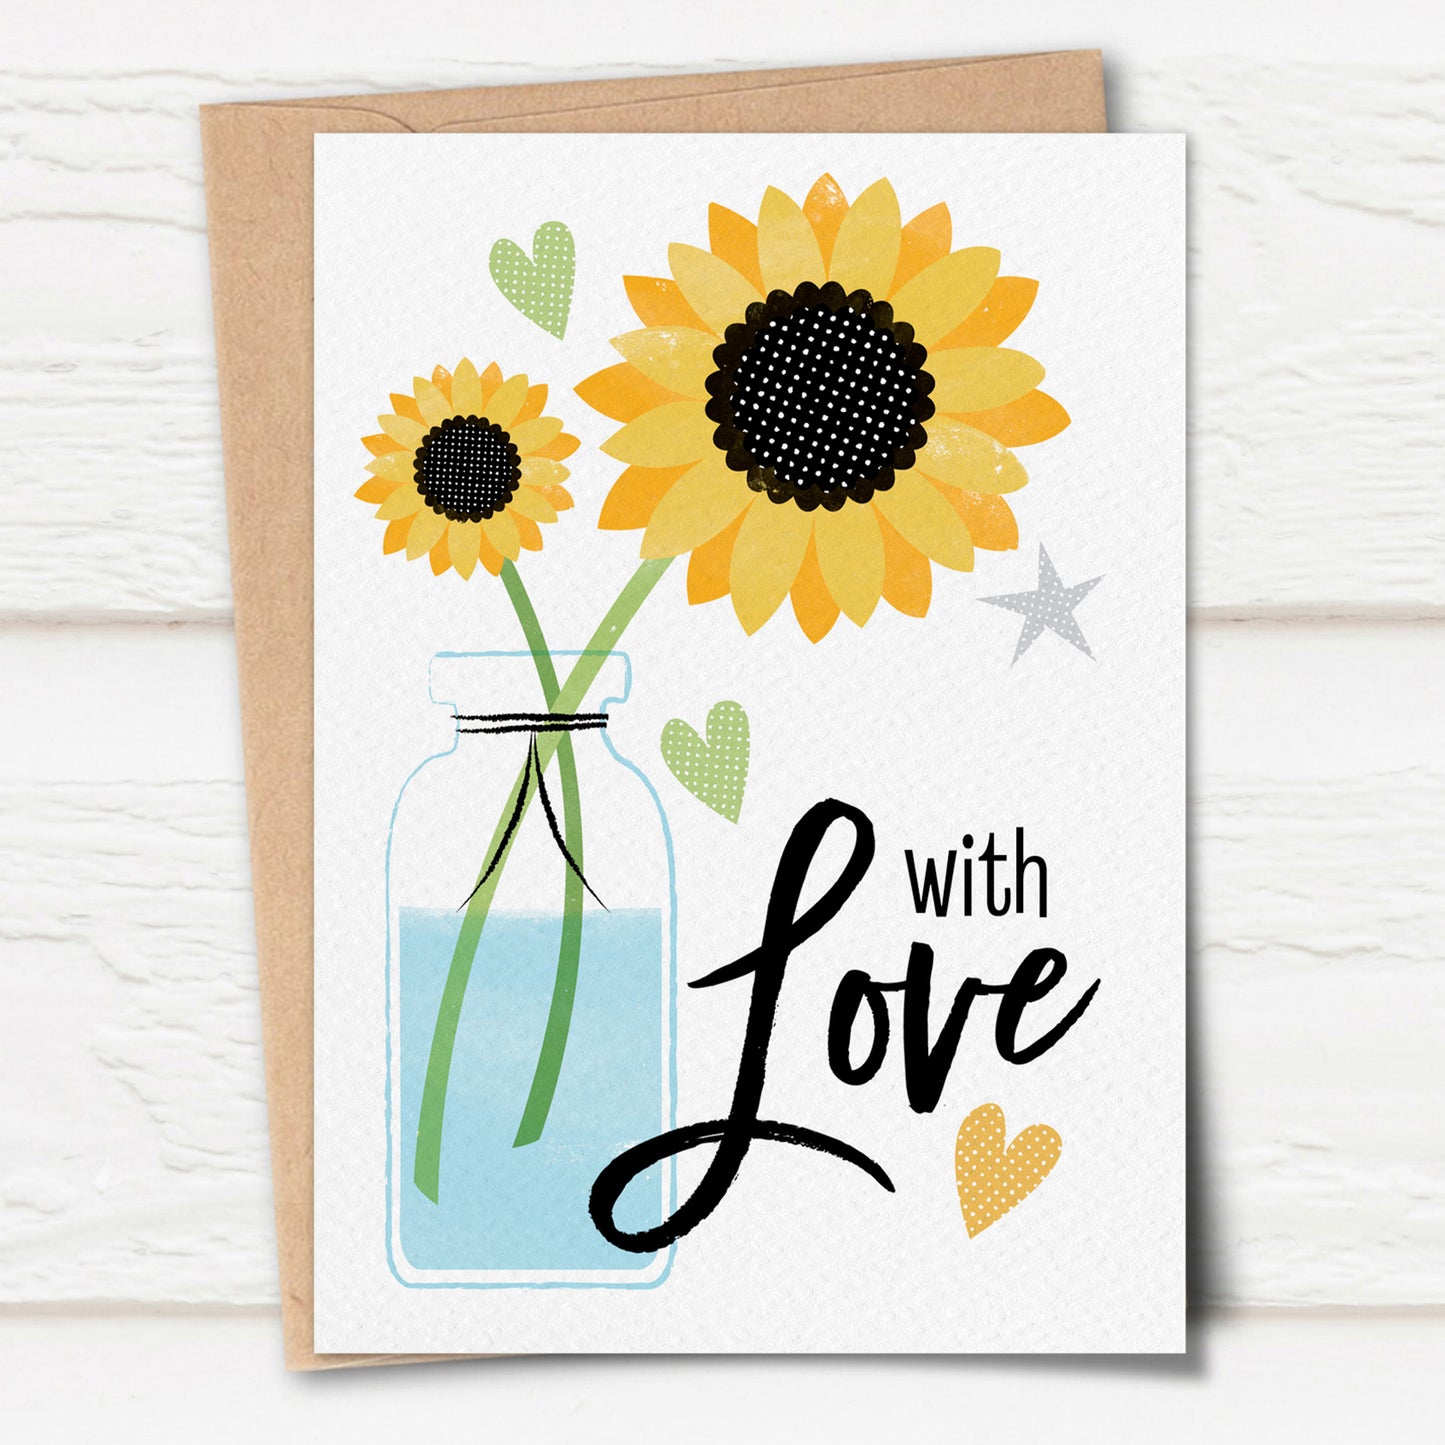 Sketchy Sunflowers 'With Love' Card